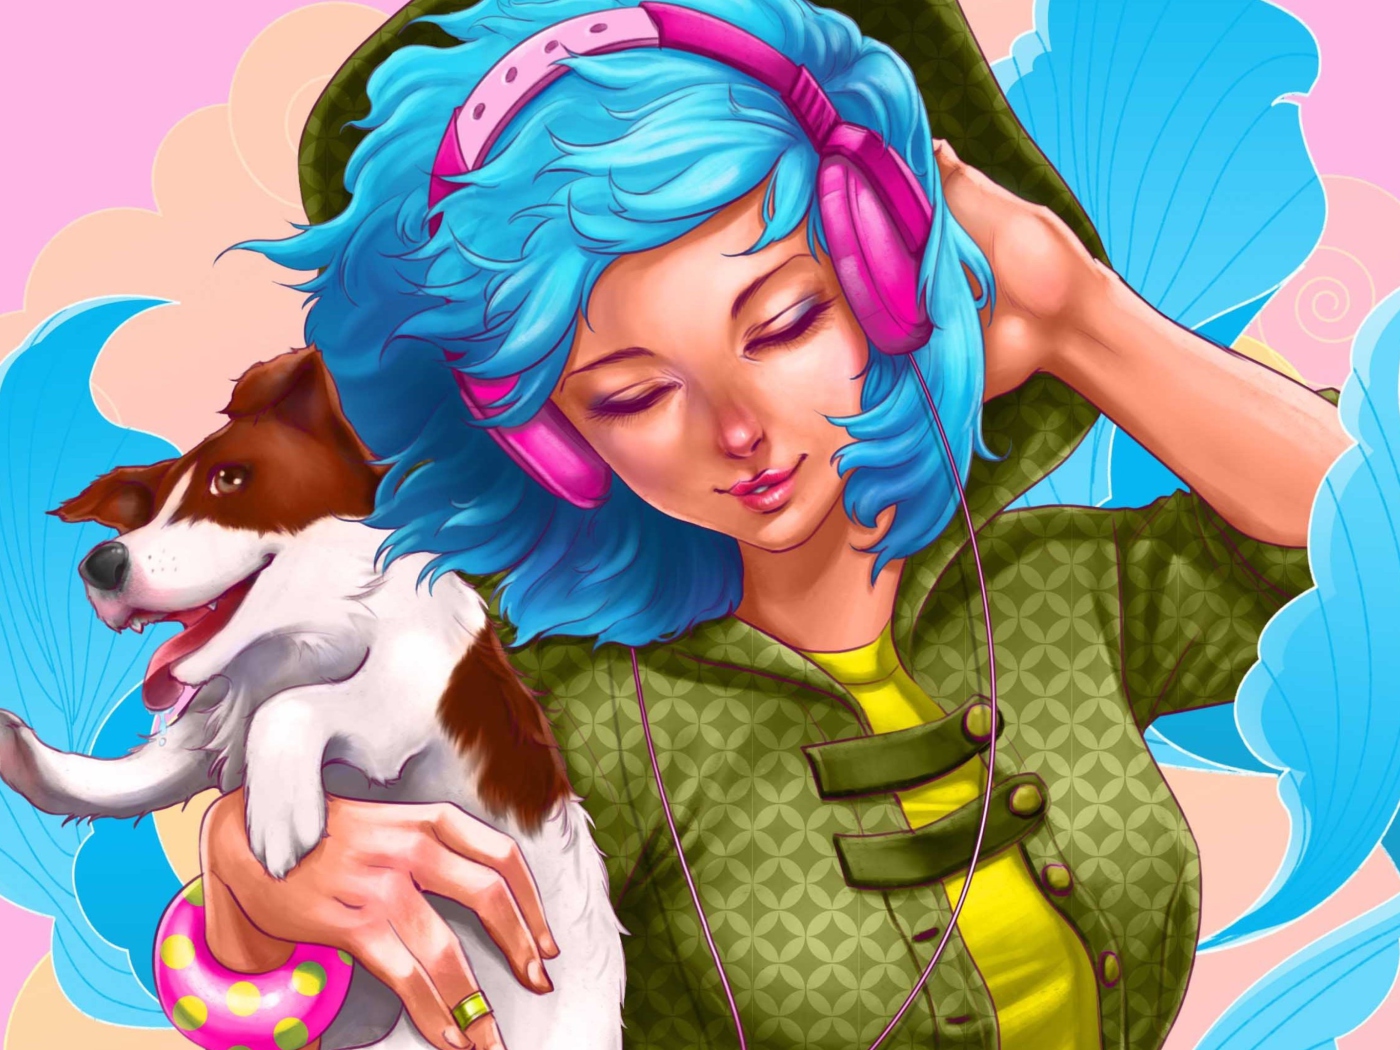 Girl With Blue Hair And Pink Headphones Drawing screenshot #1 1400x1050